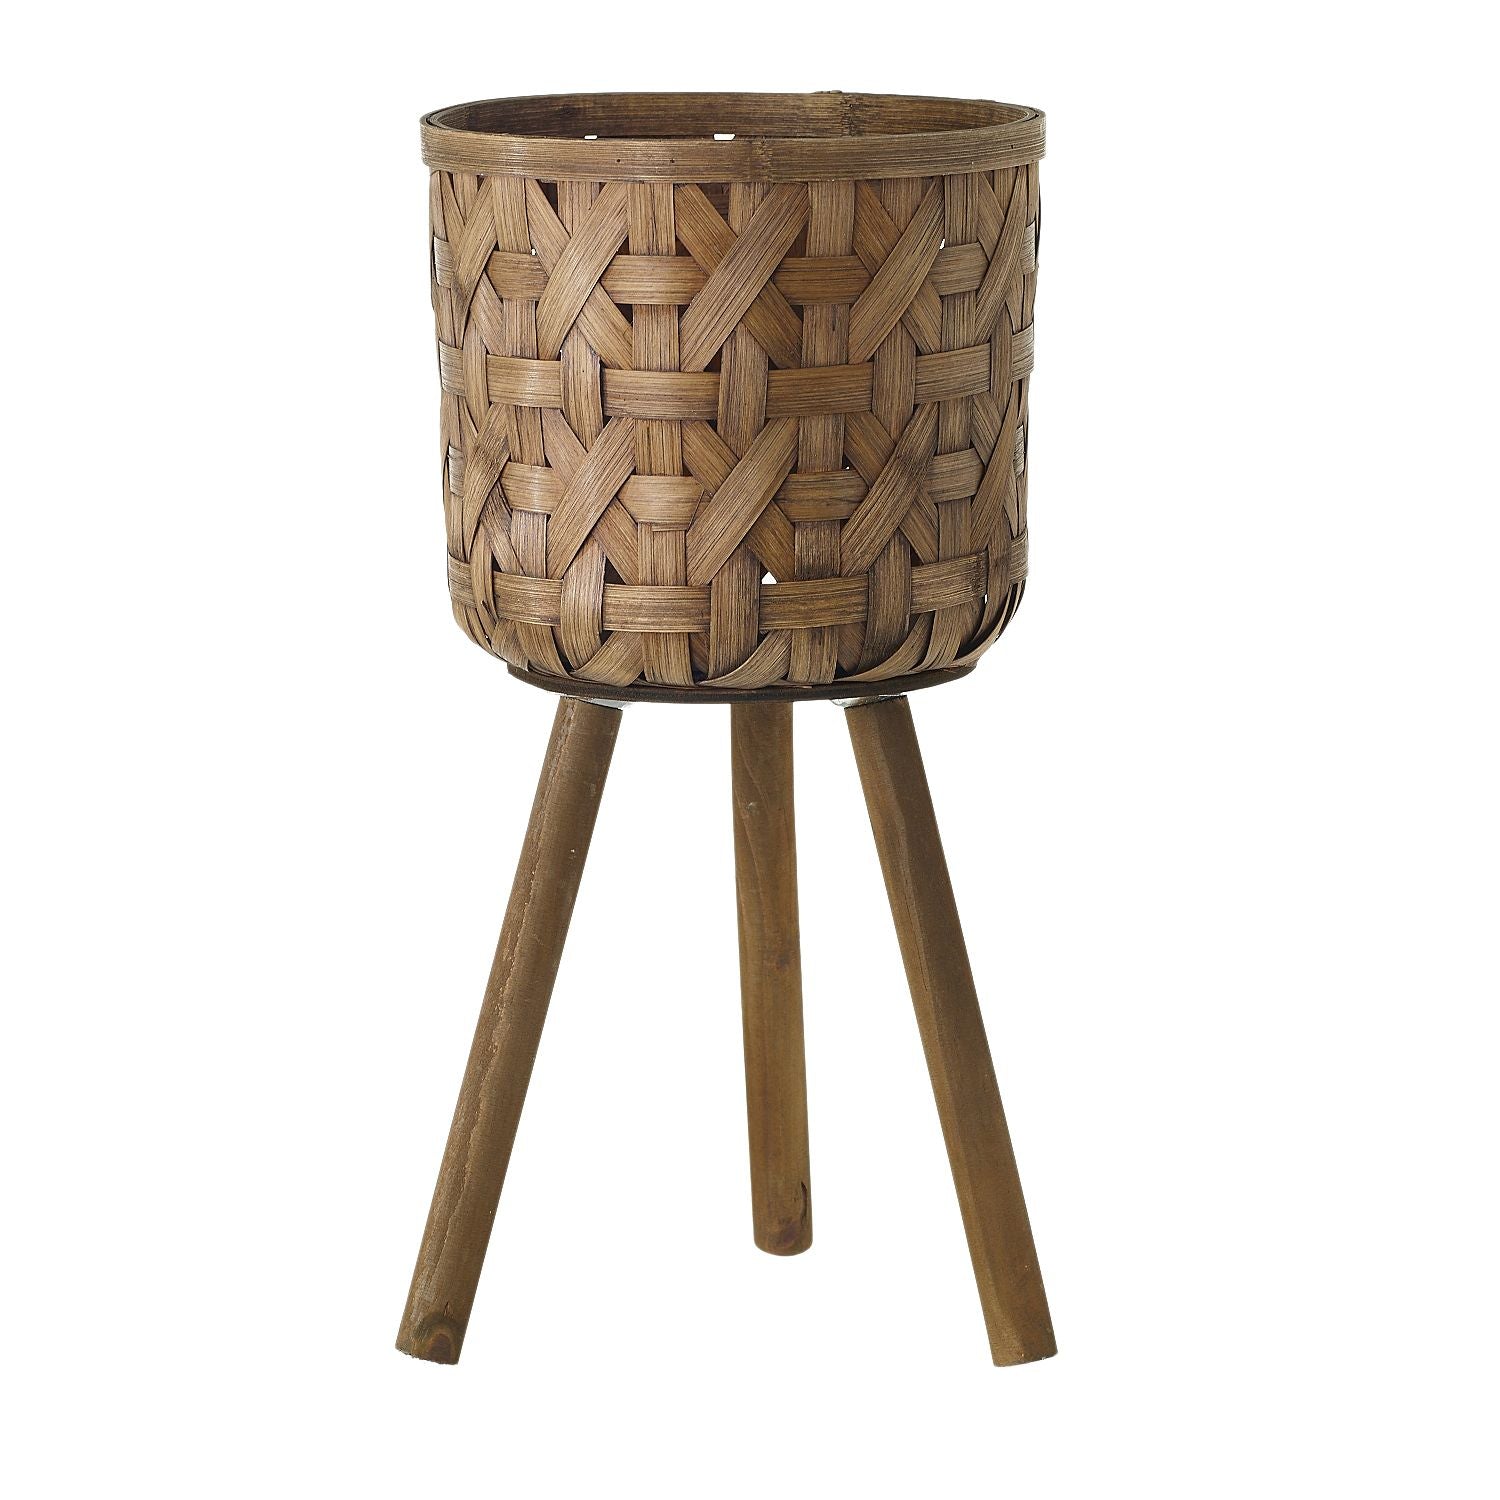 The Bamboo Woven Basket